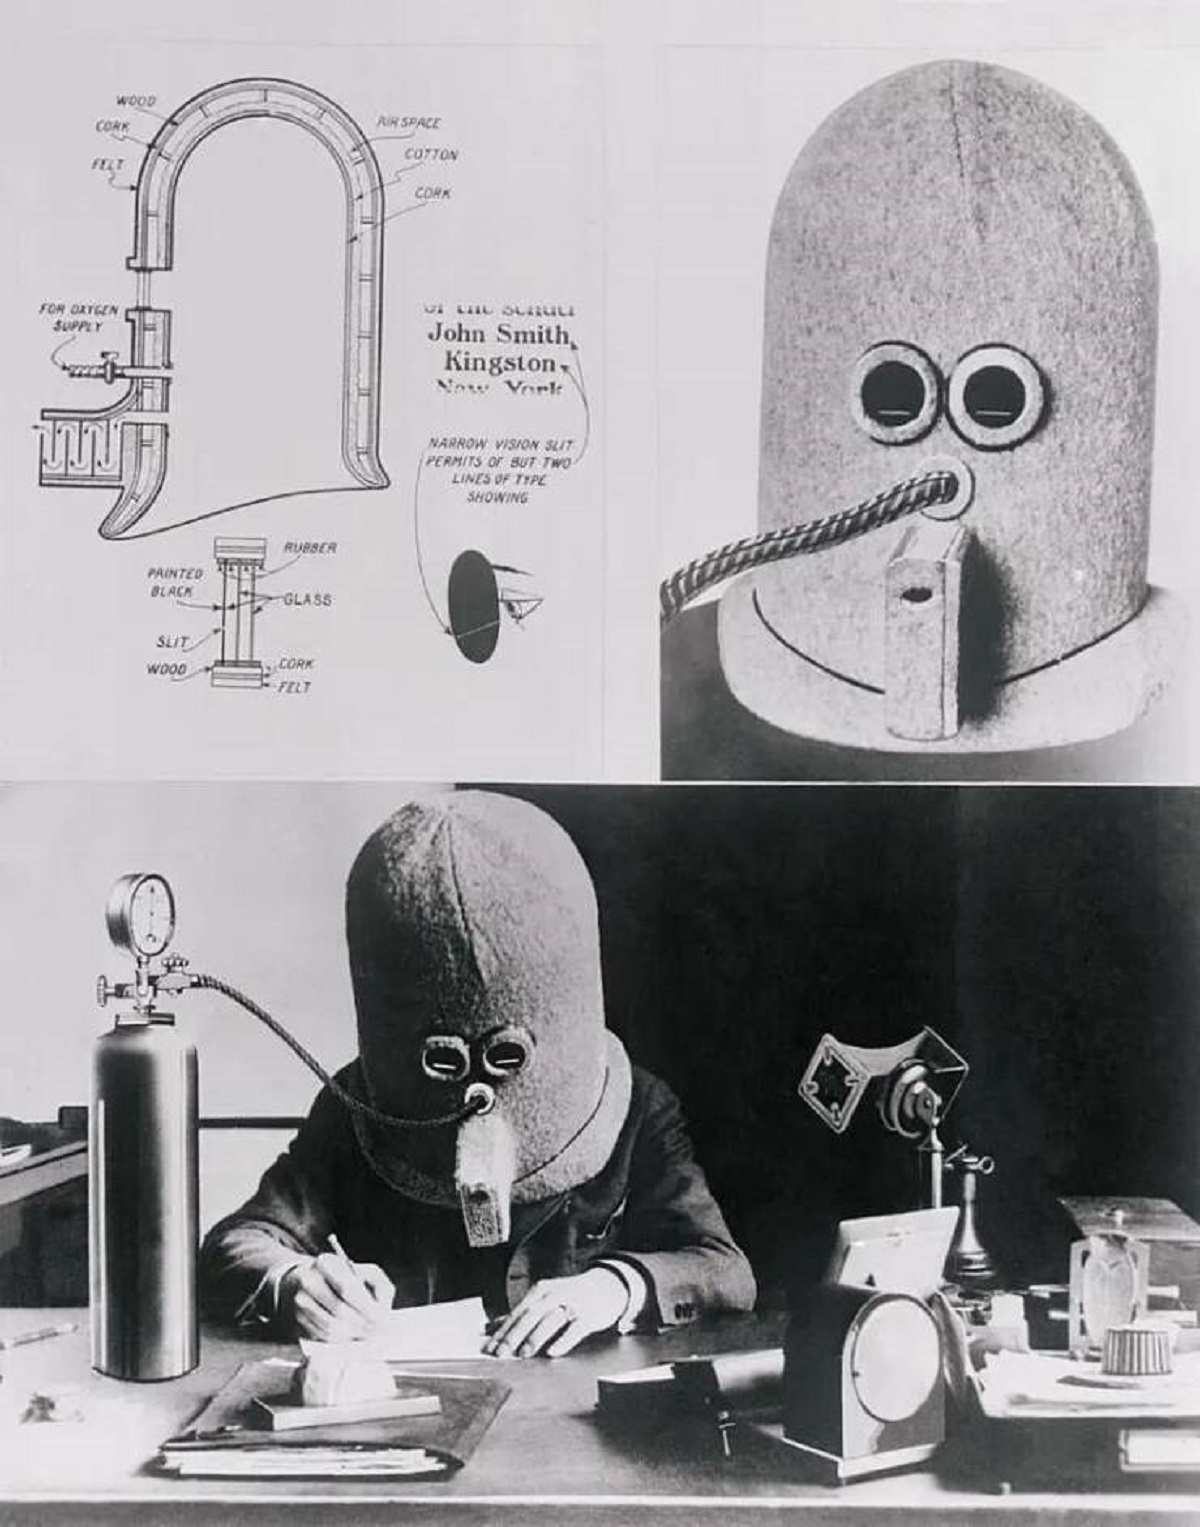 In 1925, Hugo Gernsback invented "The Isolator," a helmet designed to completely block out any and all distractions: